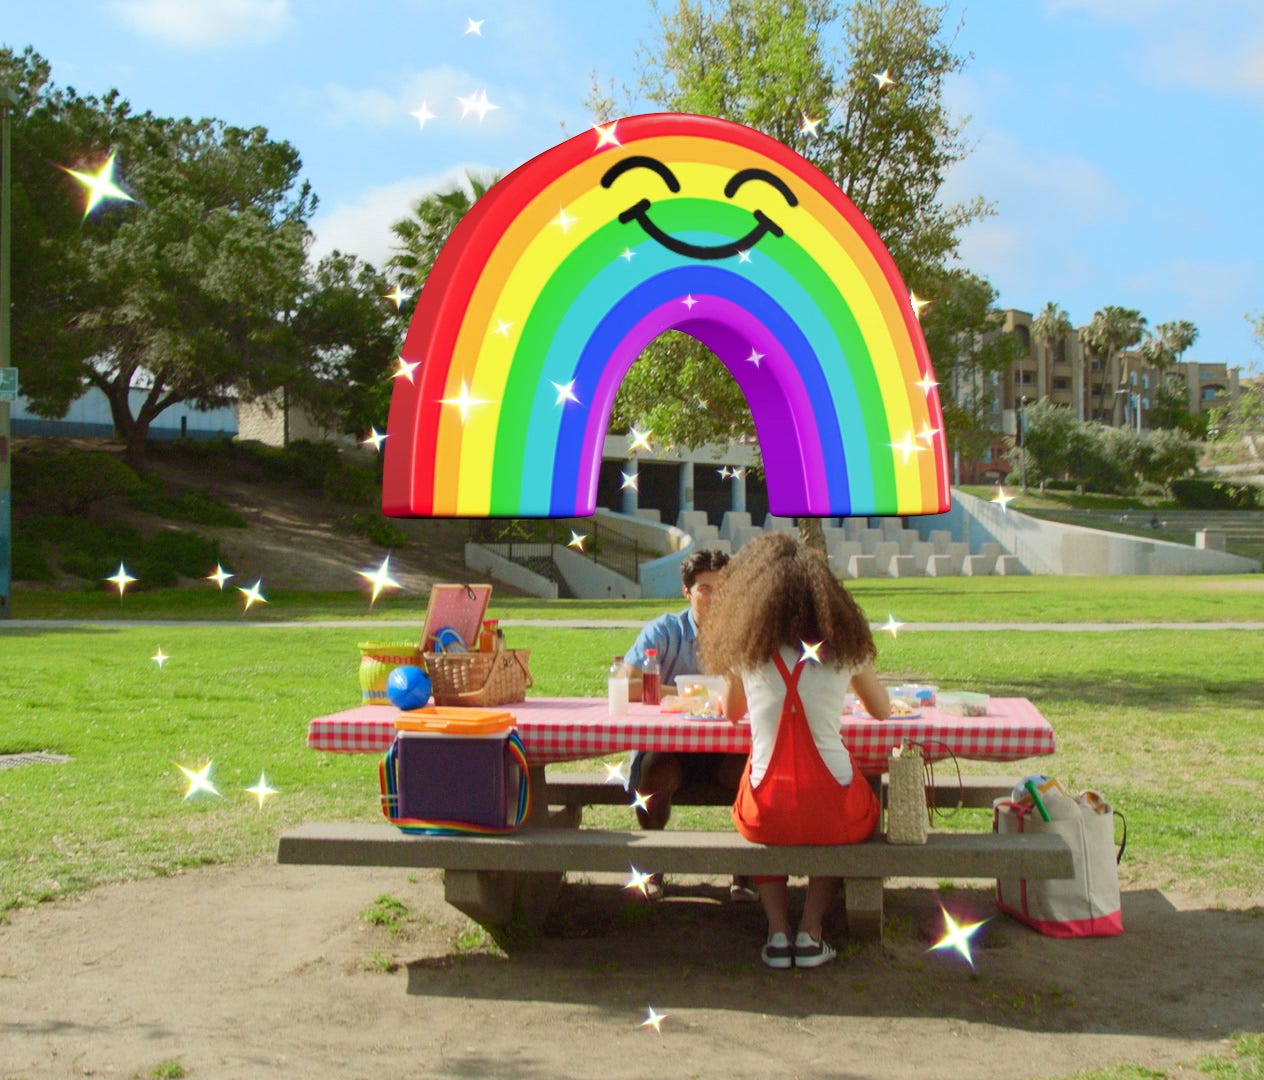 Snapchat's New World Lenses let you add 3D images to your photos.